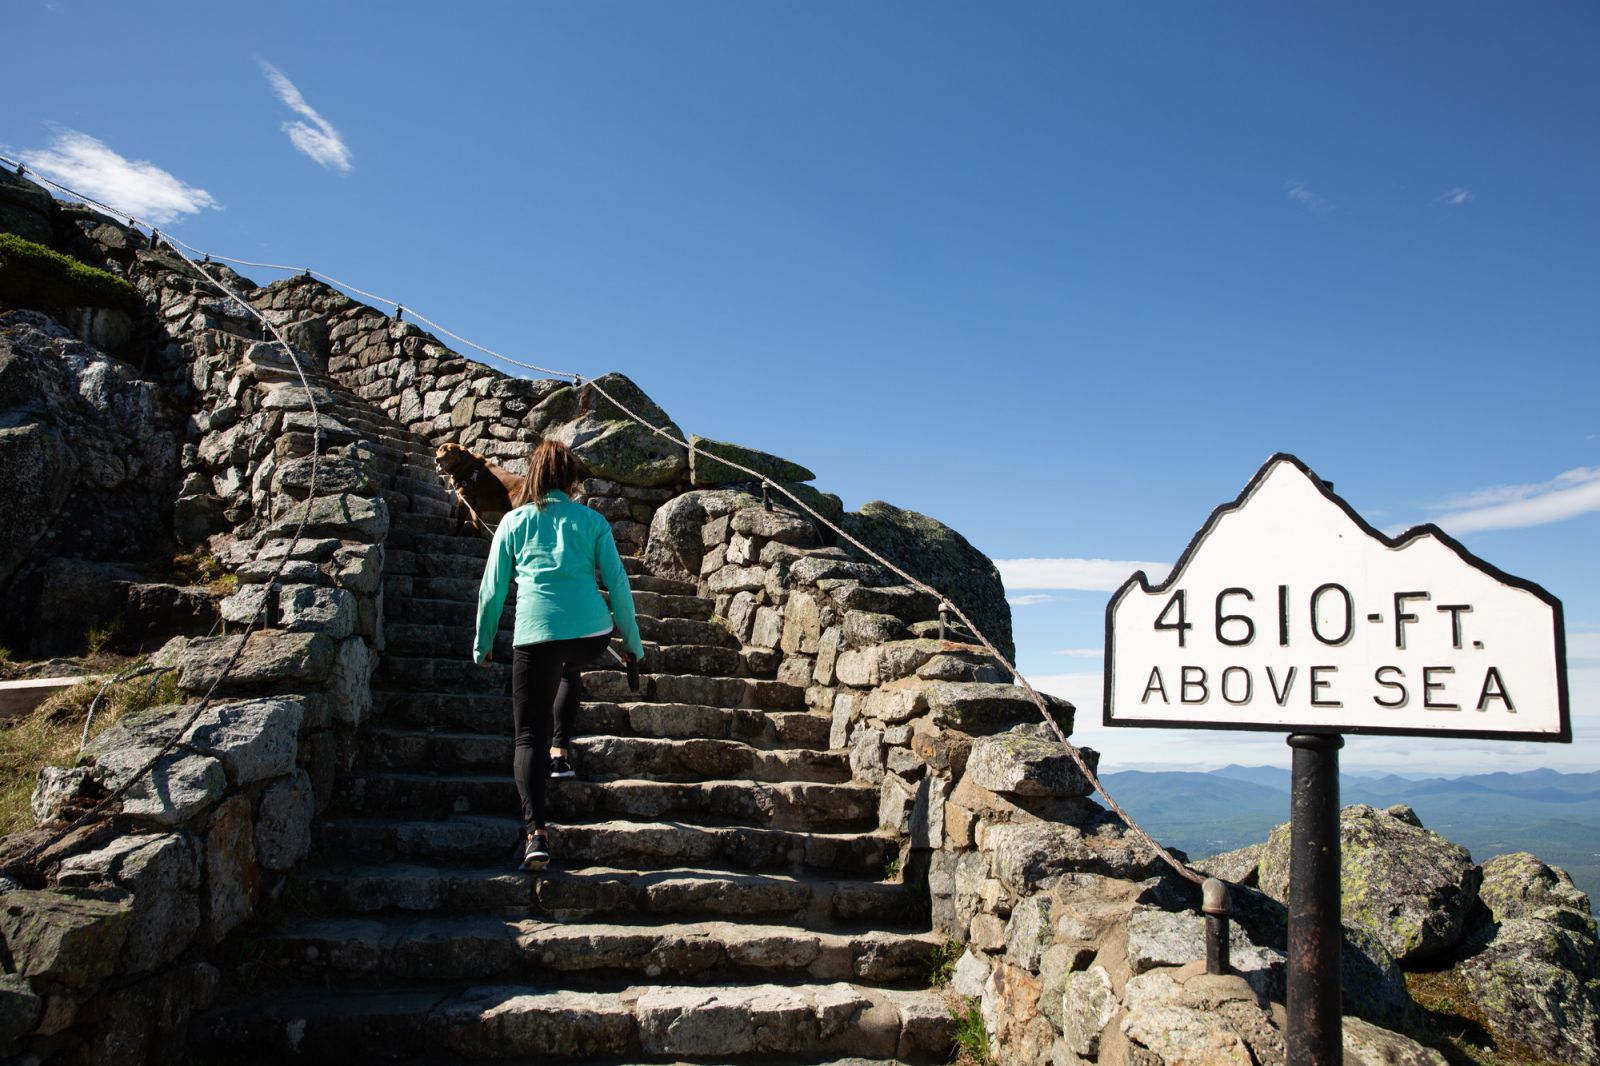 Visitors ascend the stairs towards Whiteface castle on the summit with mountains in the background.